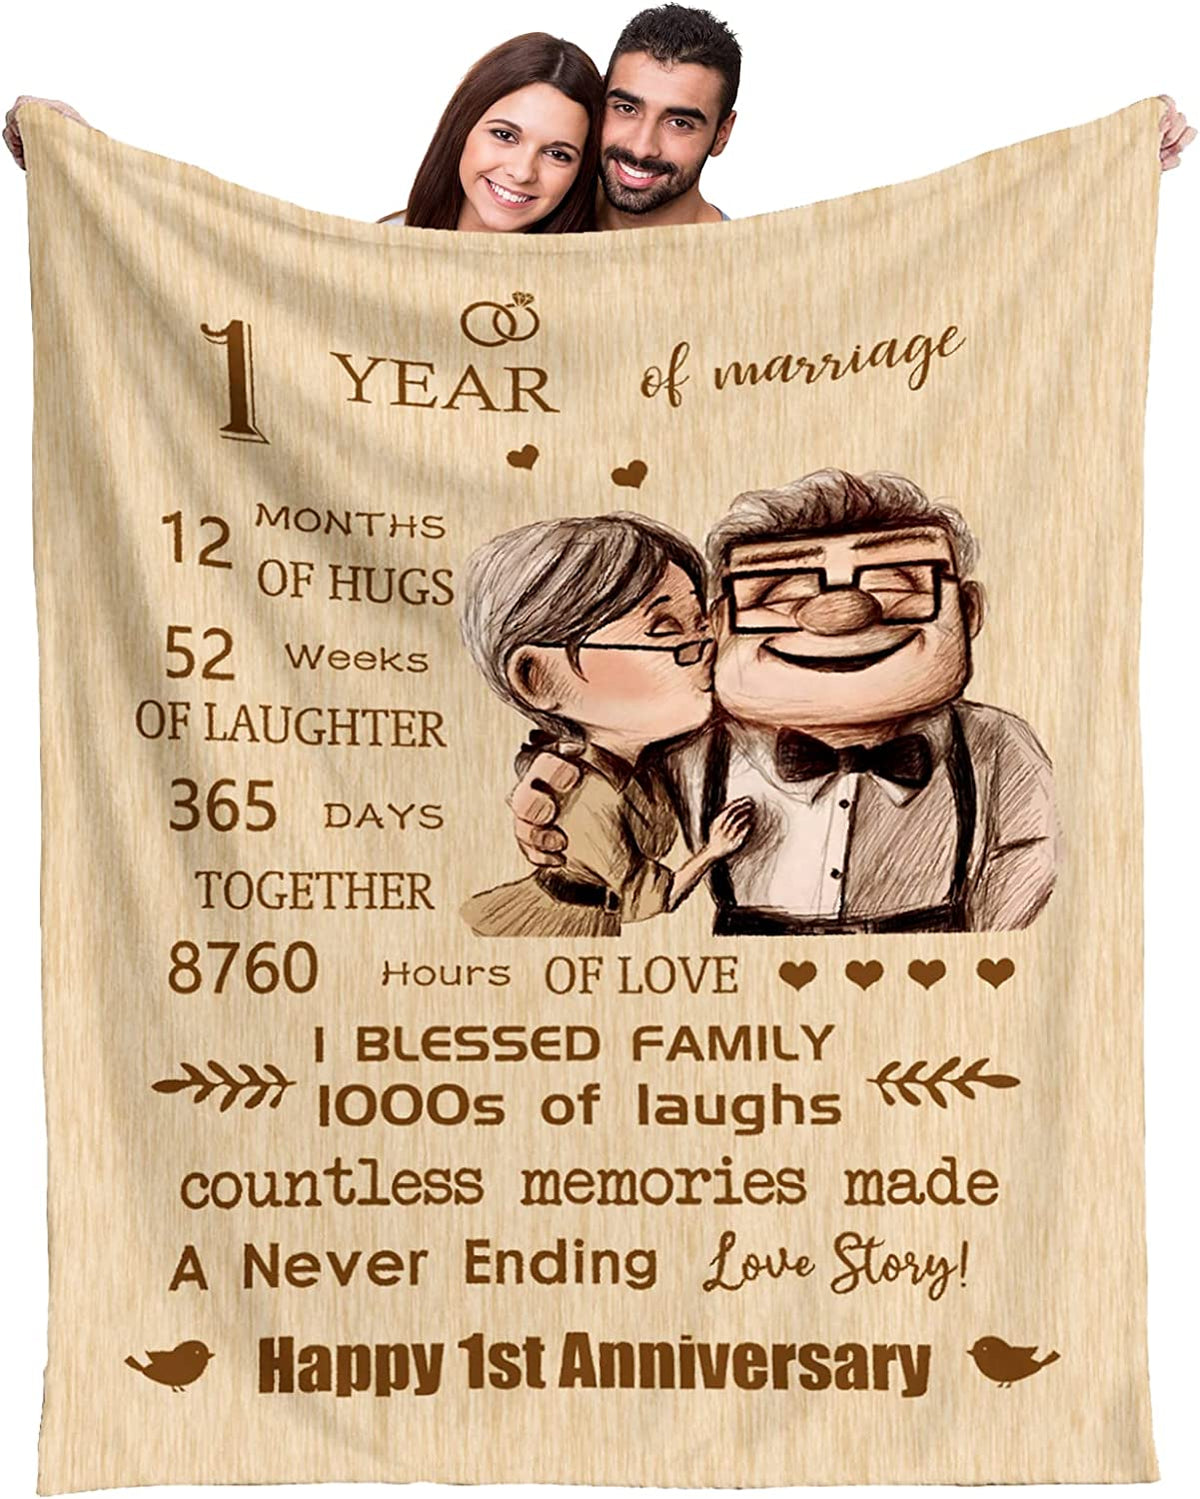 1st Anniversary Blanket Gifts Wedding, 1 Years of Marriage Gift for Wife, Parents, Friends Warm 1st Wedding Idea Valentine's Day Gift Idea